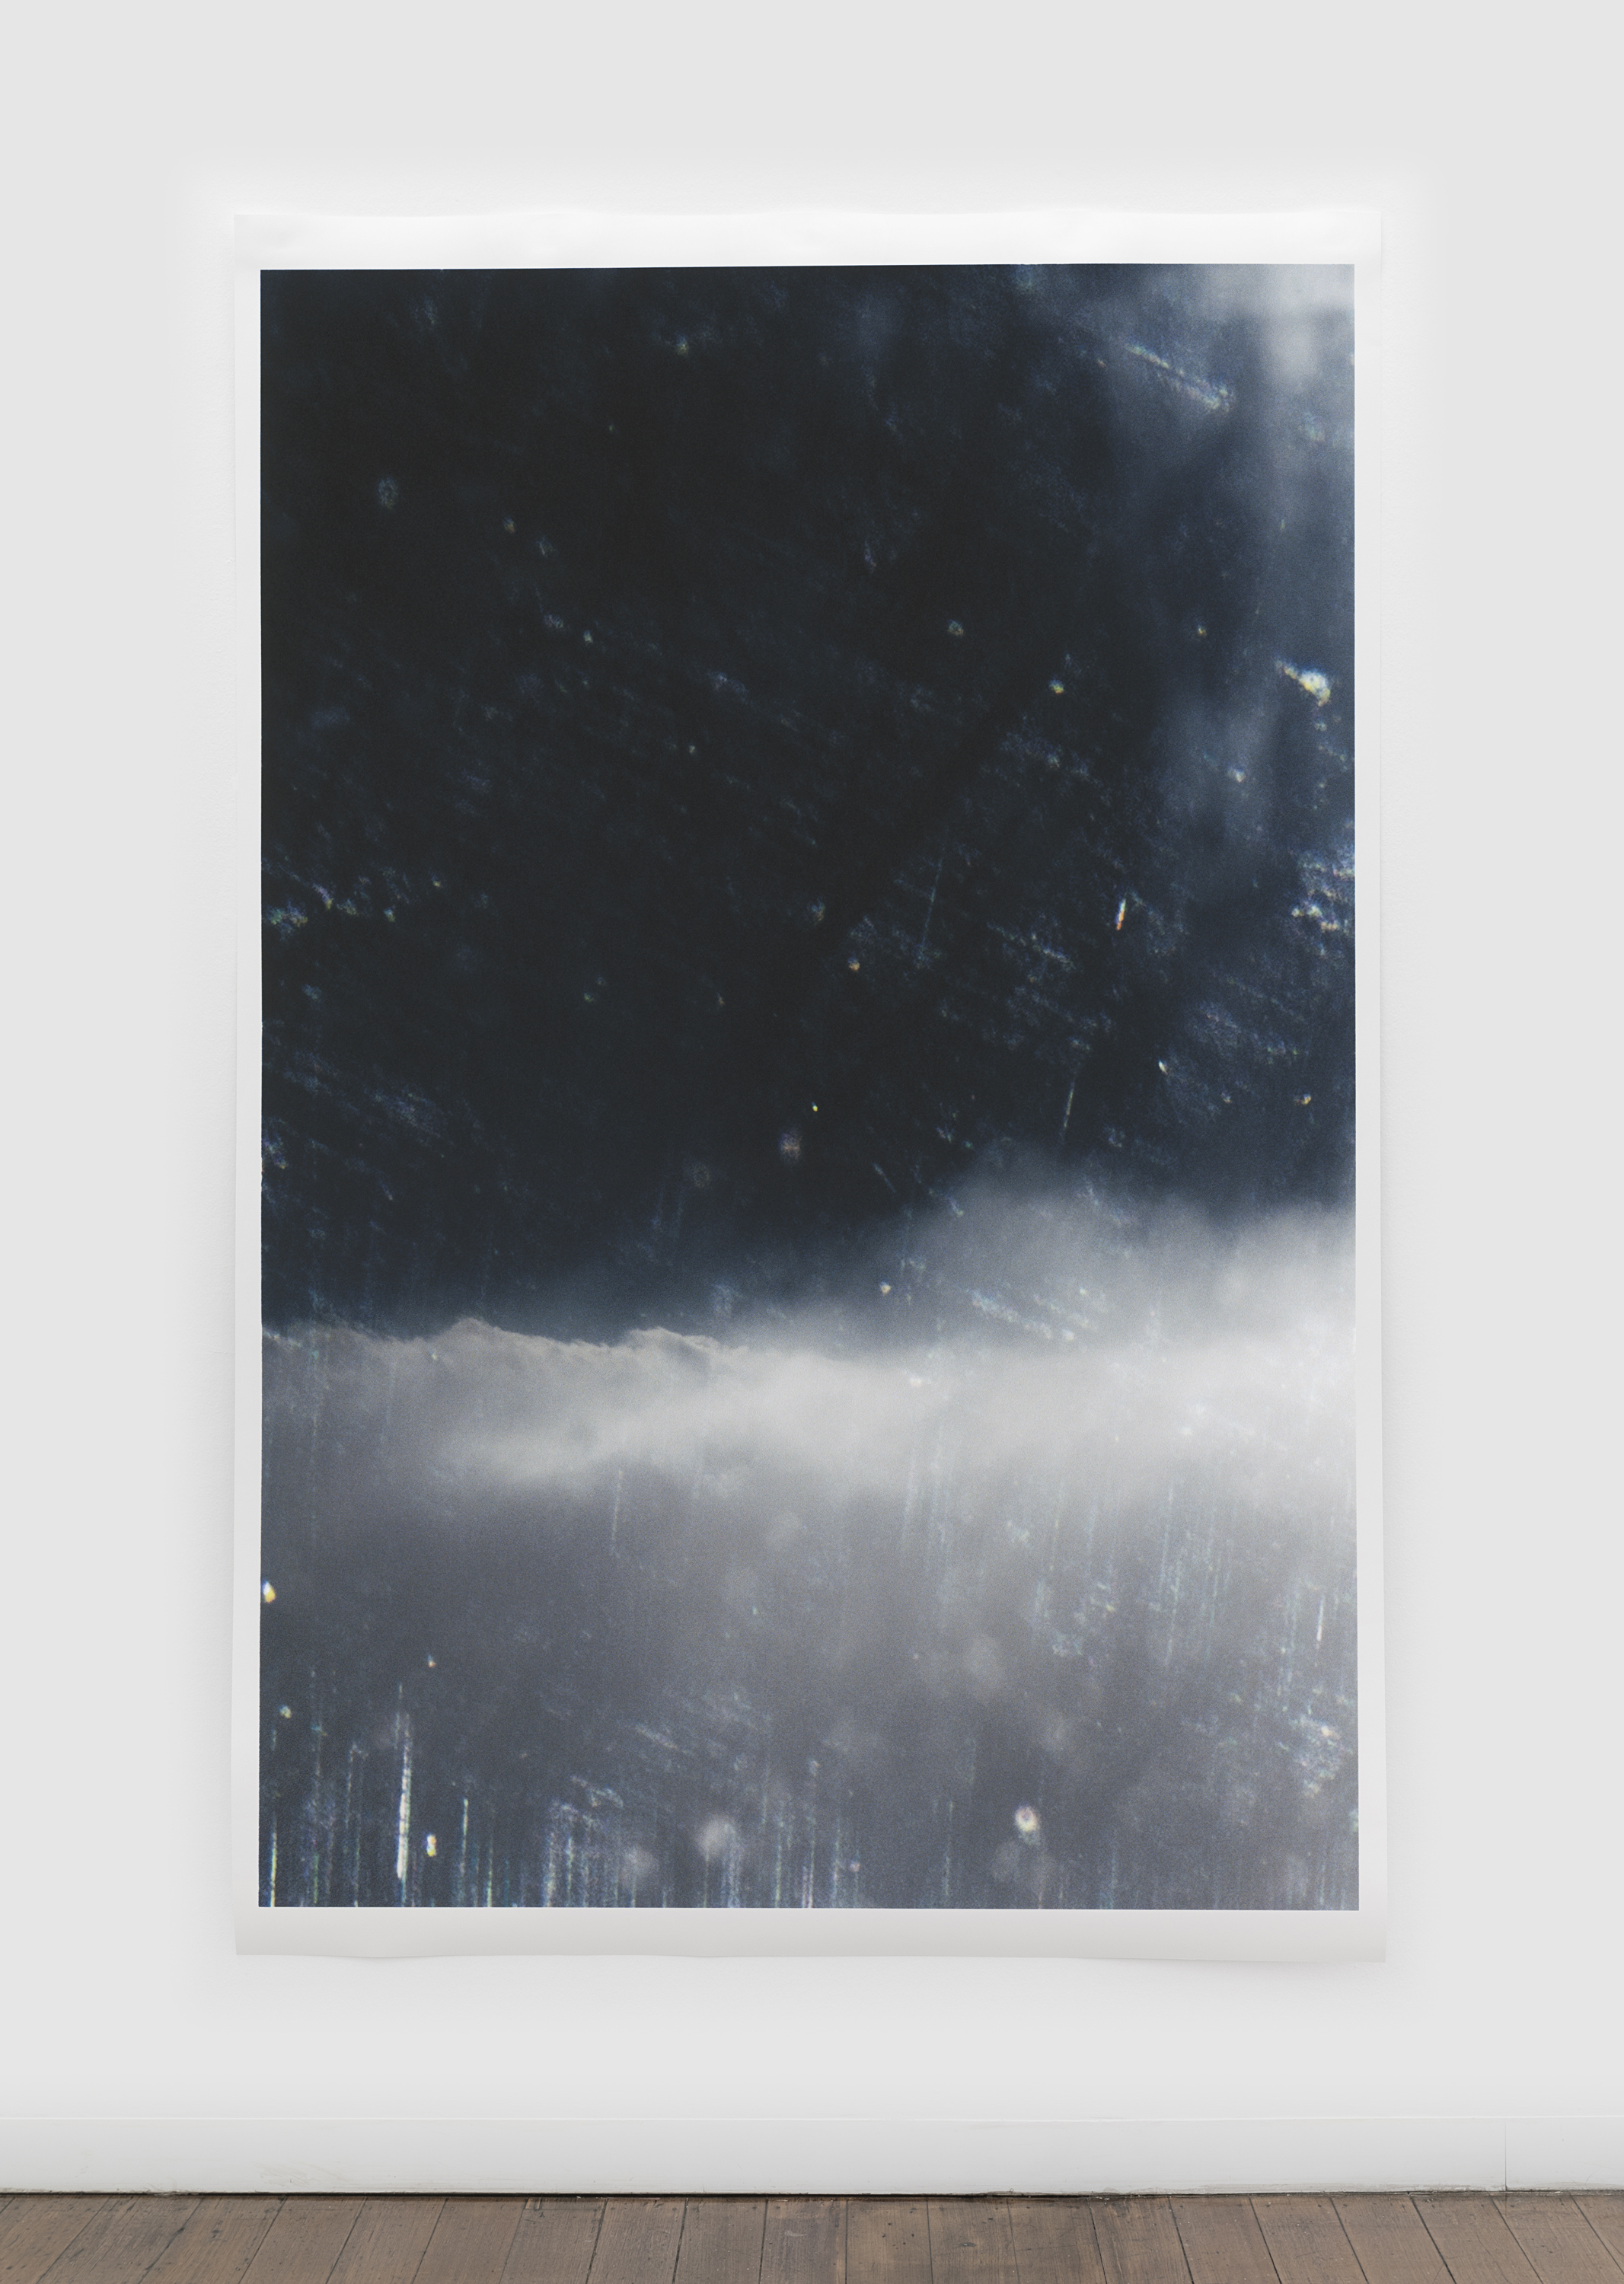   Untitled (glass, sky) , pigment print on paper, sheet: 229.6 × 150.5 cm (90 3/8 × 59 1/4 in), framed: 240.5 × 160.9 cm (94 6/8 × 63 3/8 in), 2019  Installation view of “the sacredness of something” at Arc One Gallery, Melbourne (2019) 